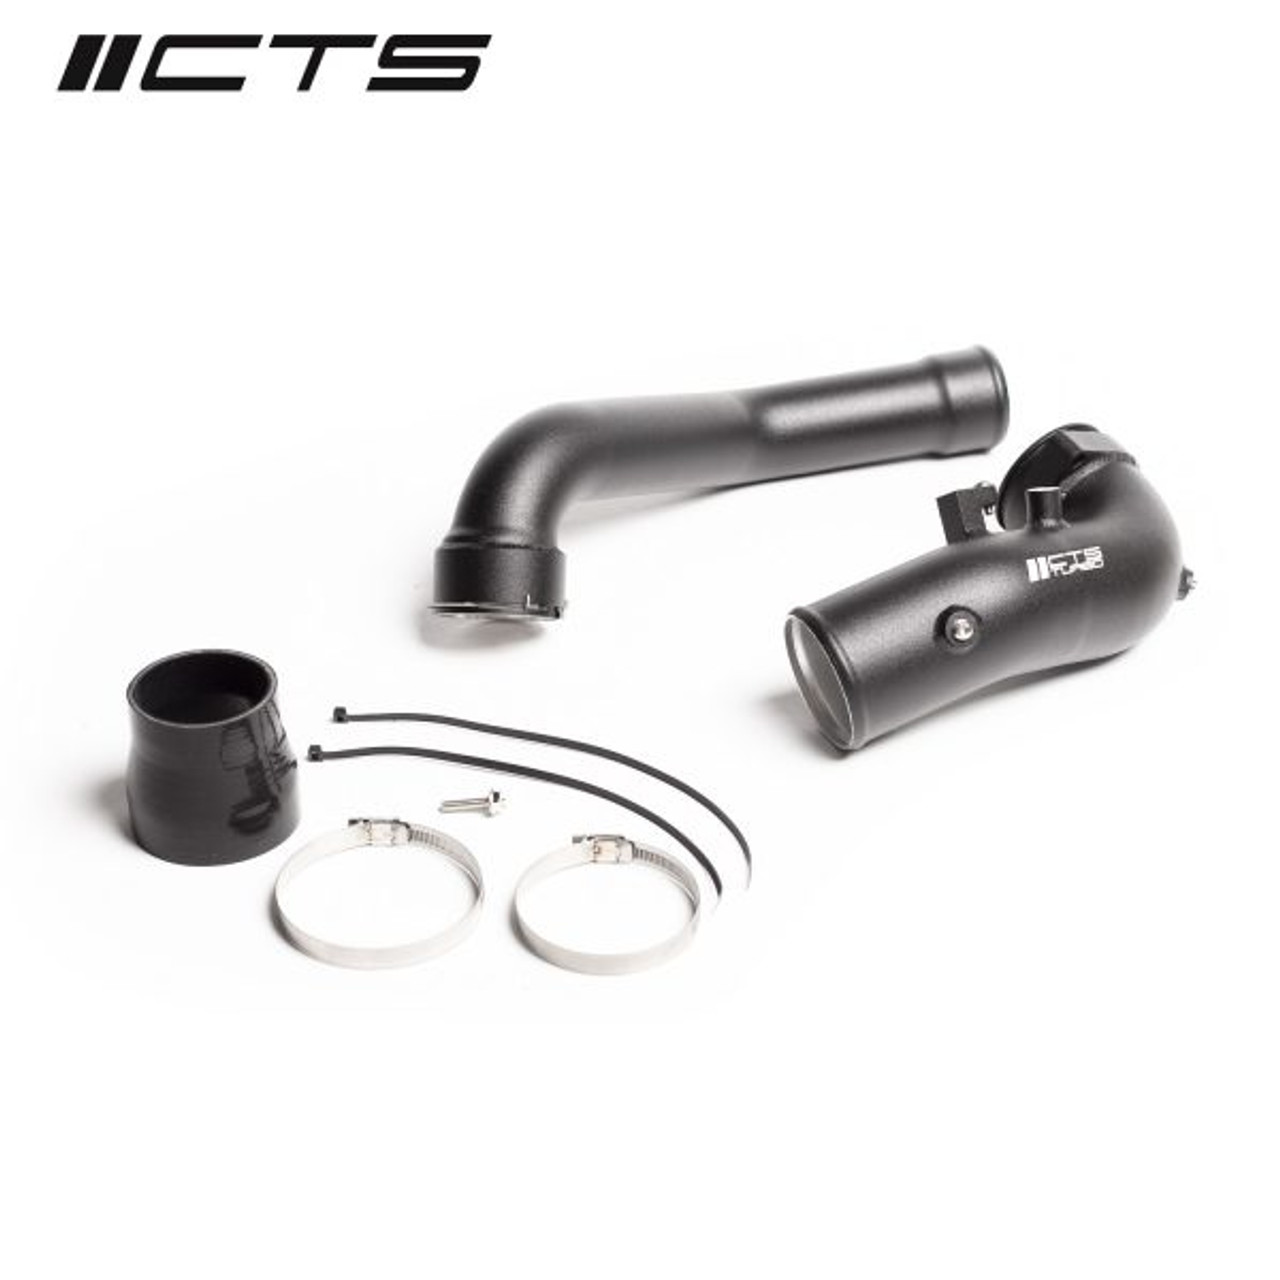 BMW B58 Chargepipe Upgrade Kit - CTS Turbo CTS-IT-349